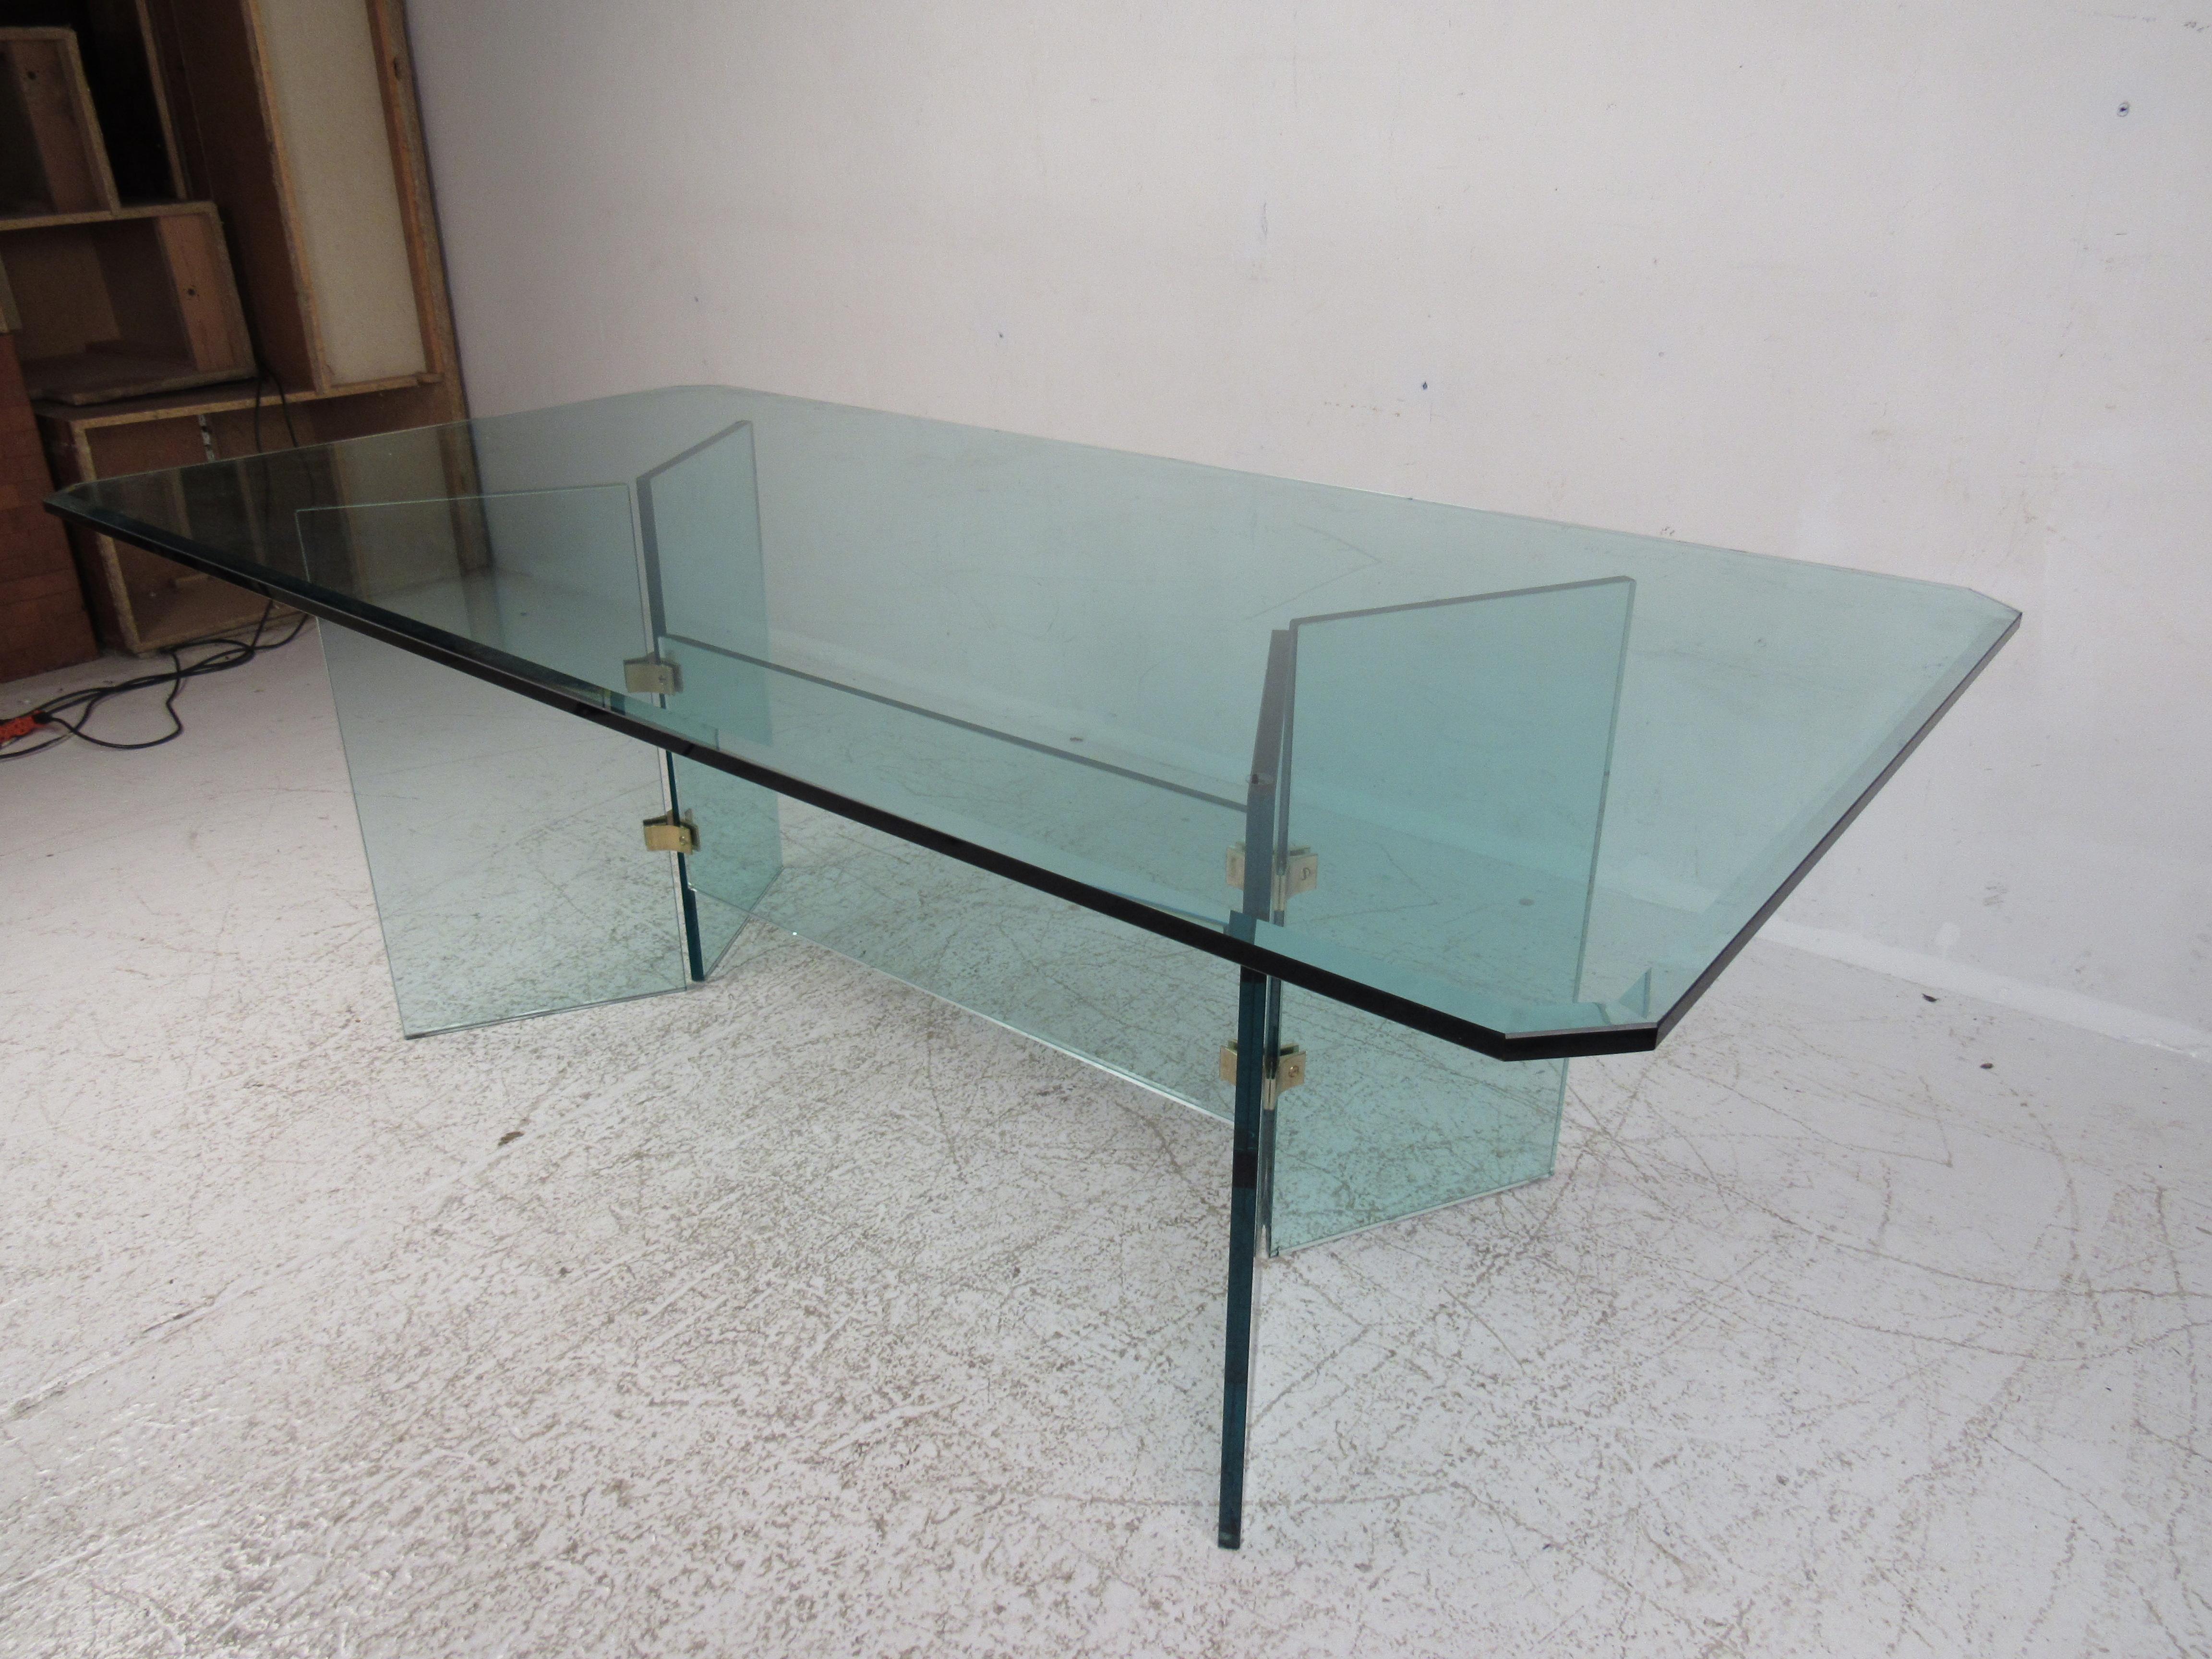 An ingenious modern design made with extremely thick beveled glass and brass fixtures. This midcentury style dining table boasts a 78 inch wide glass top offering plenty of room for guests. A sturdy base with five thick pieces of glass held together